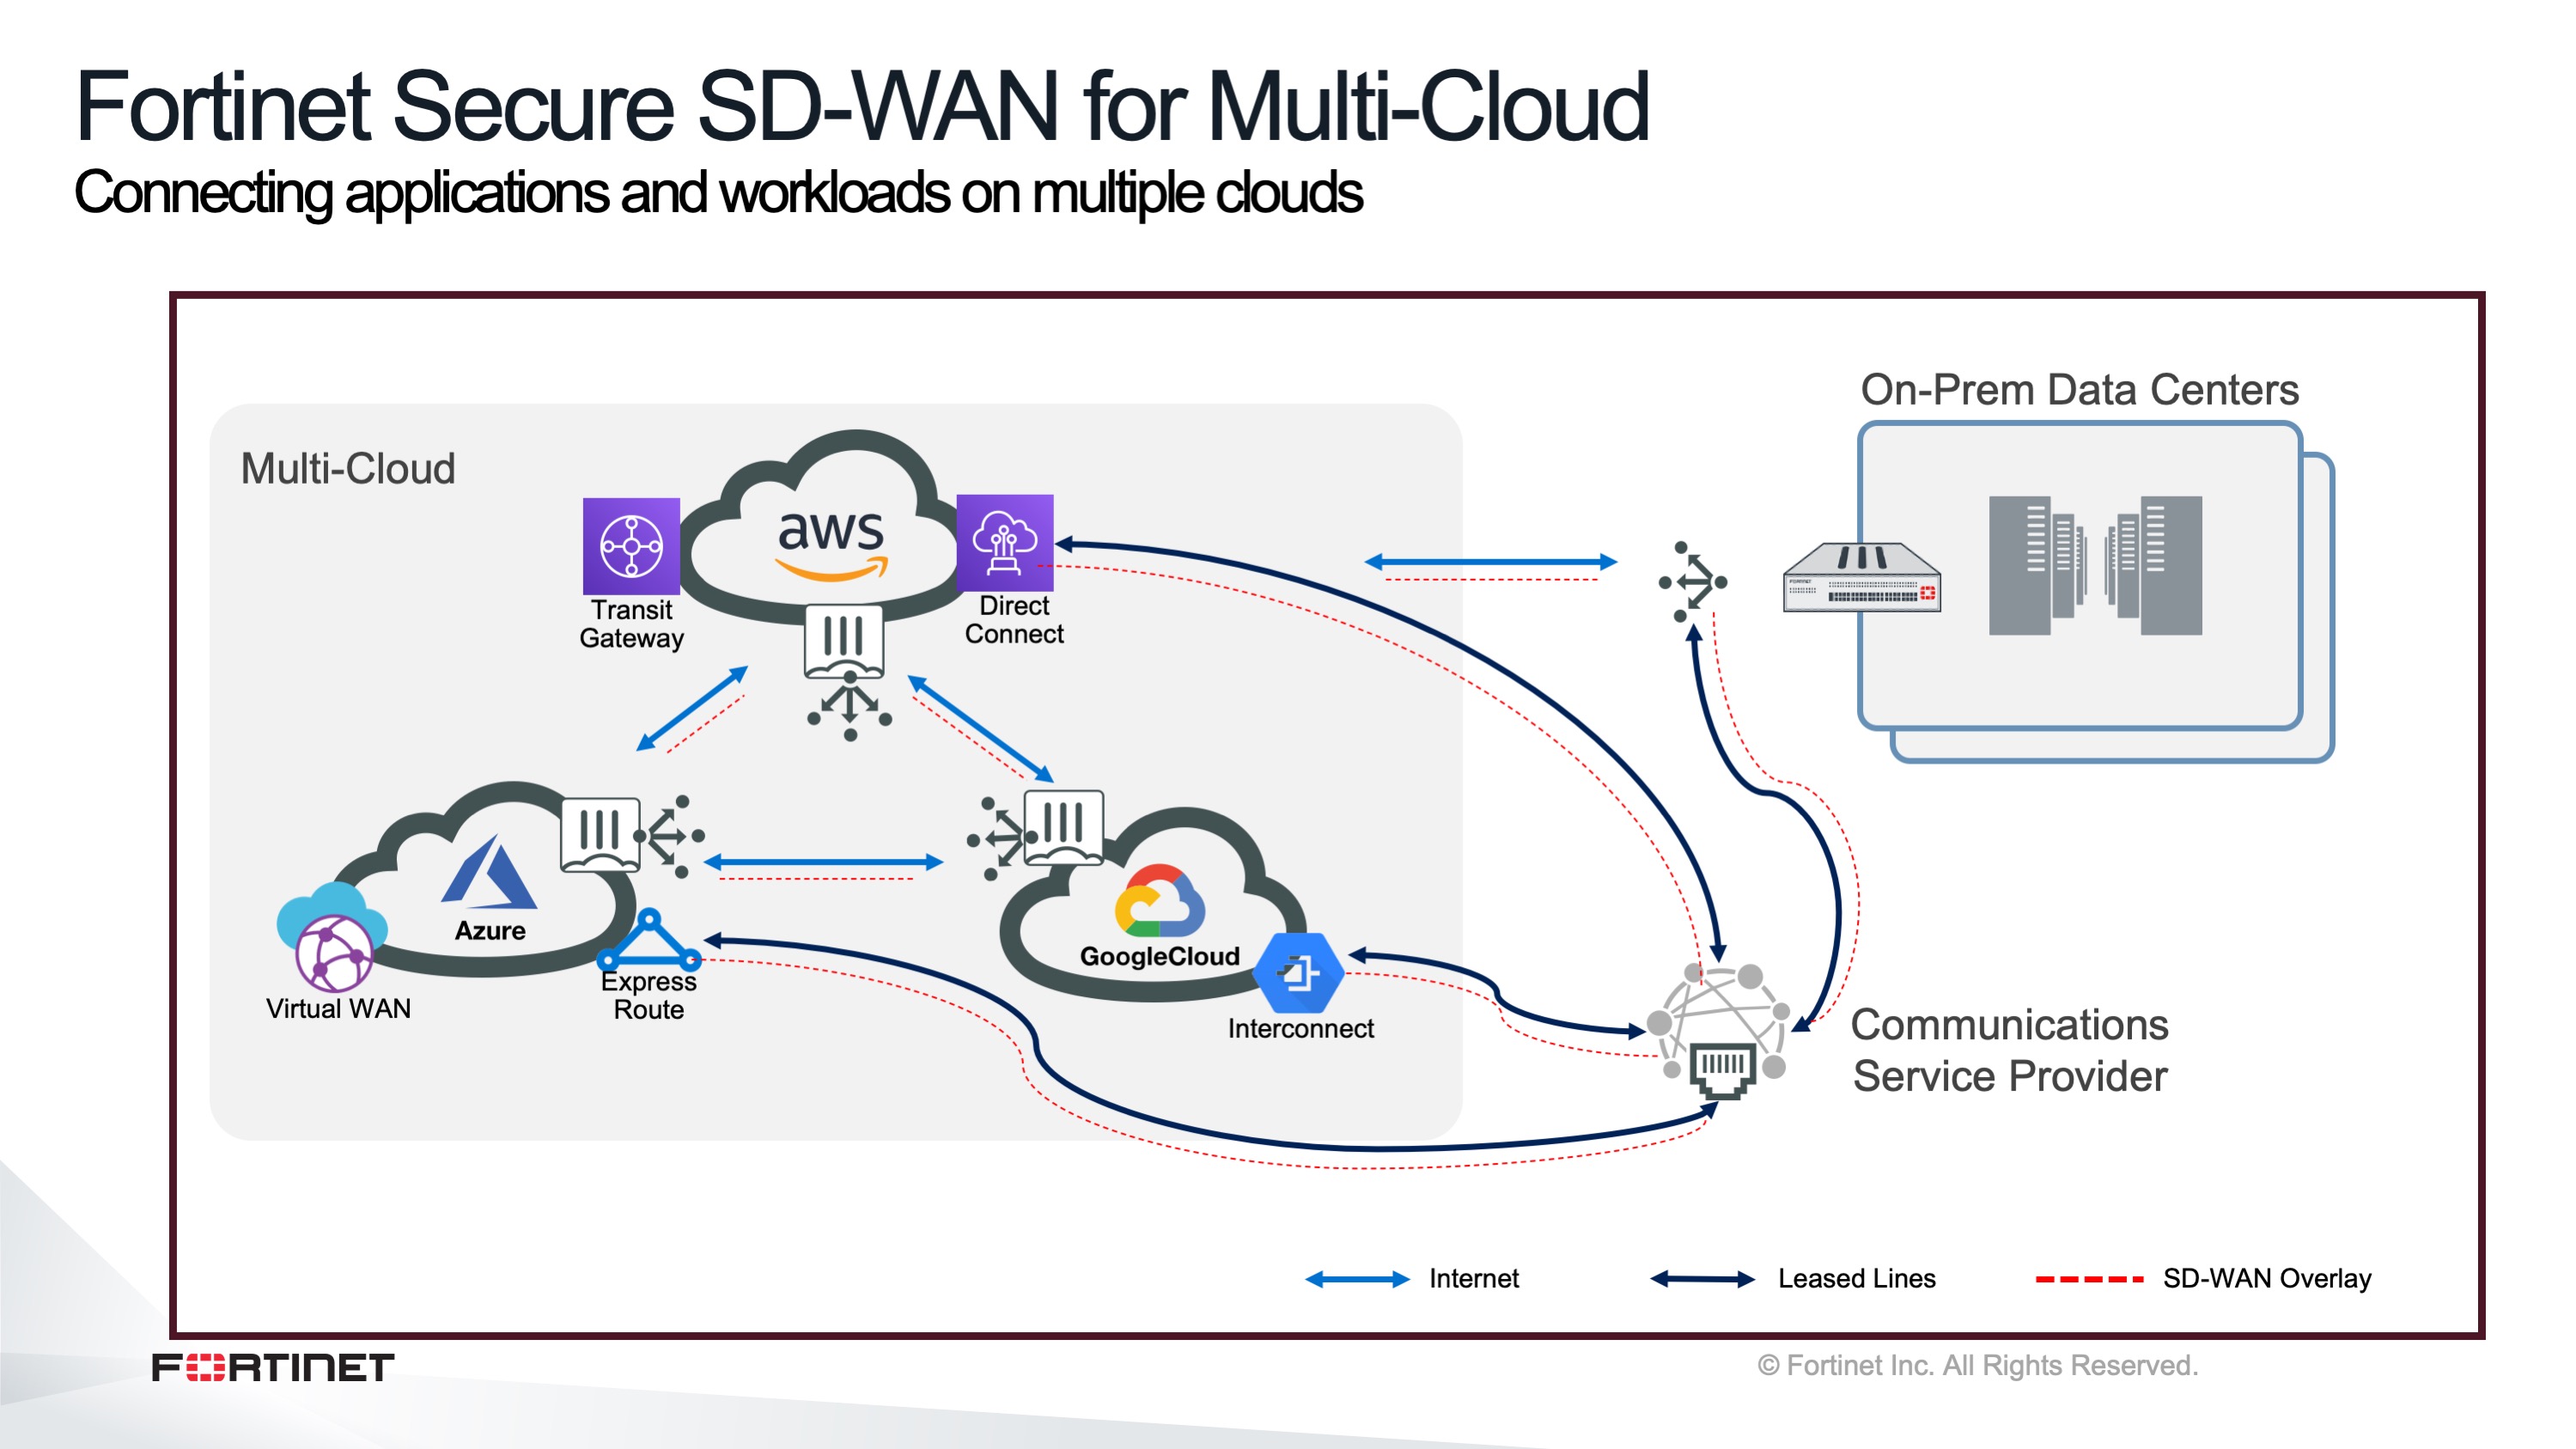 Fortinet Secure SD-WAN for multi-cloud